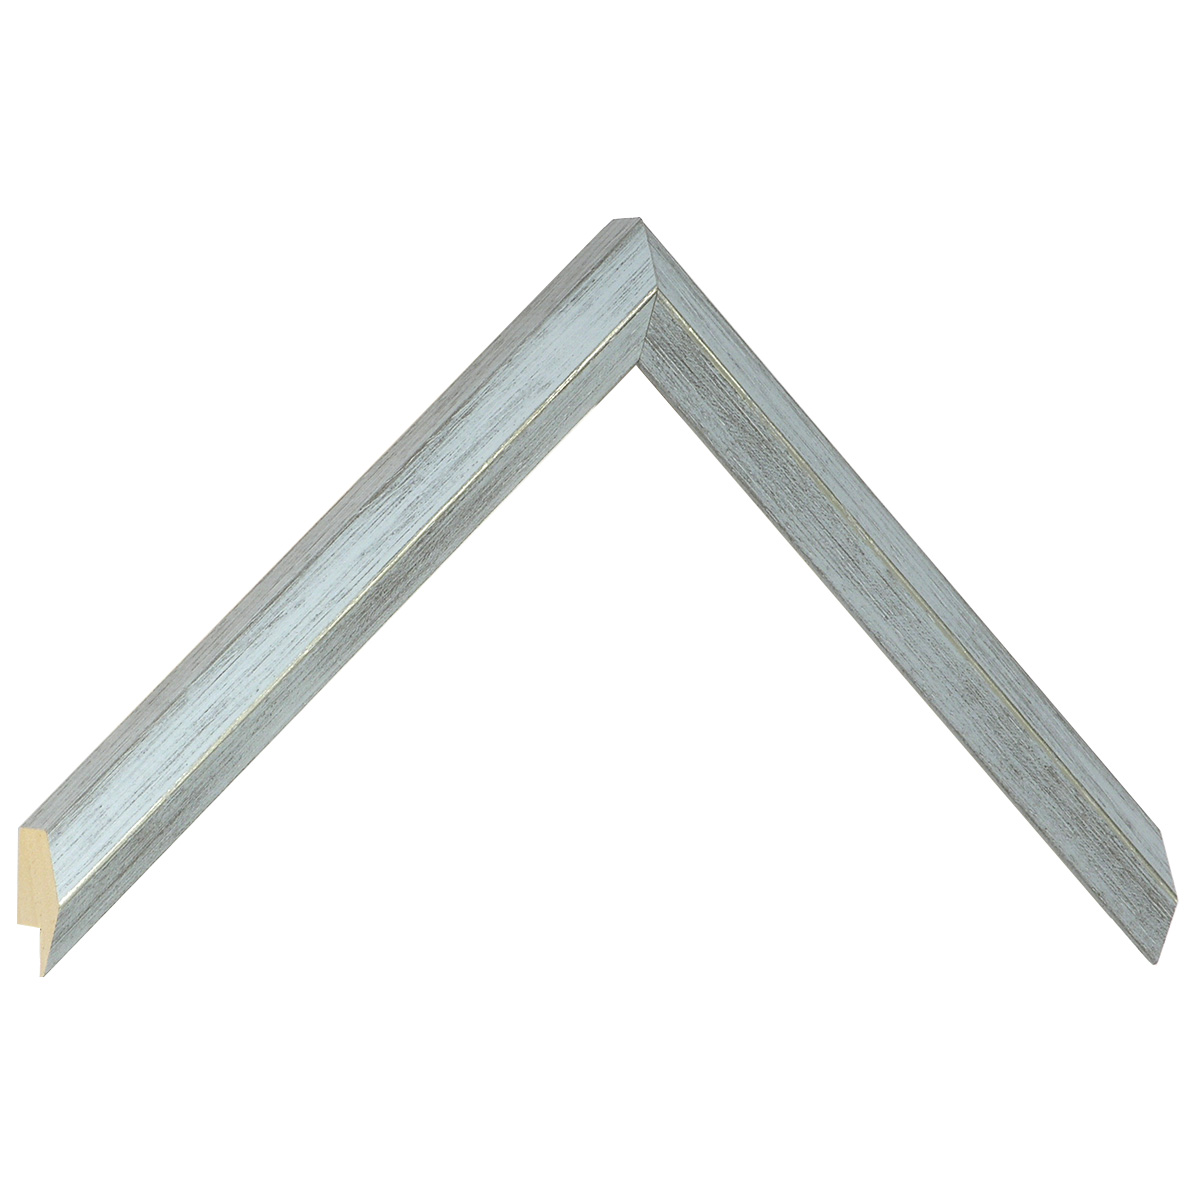 Moulding ayous - height 21mm - widht 18mm - fog gray - Sample